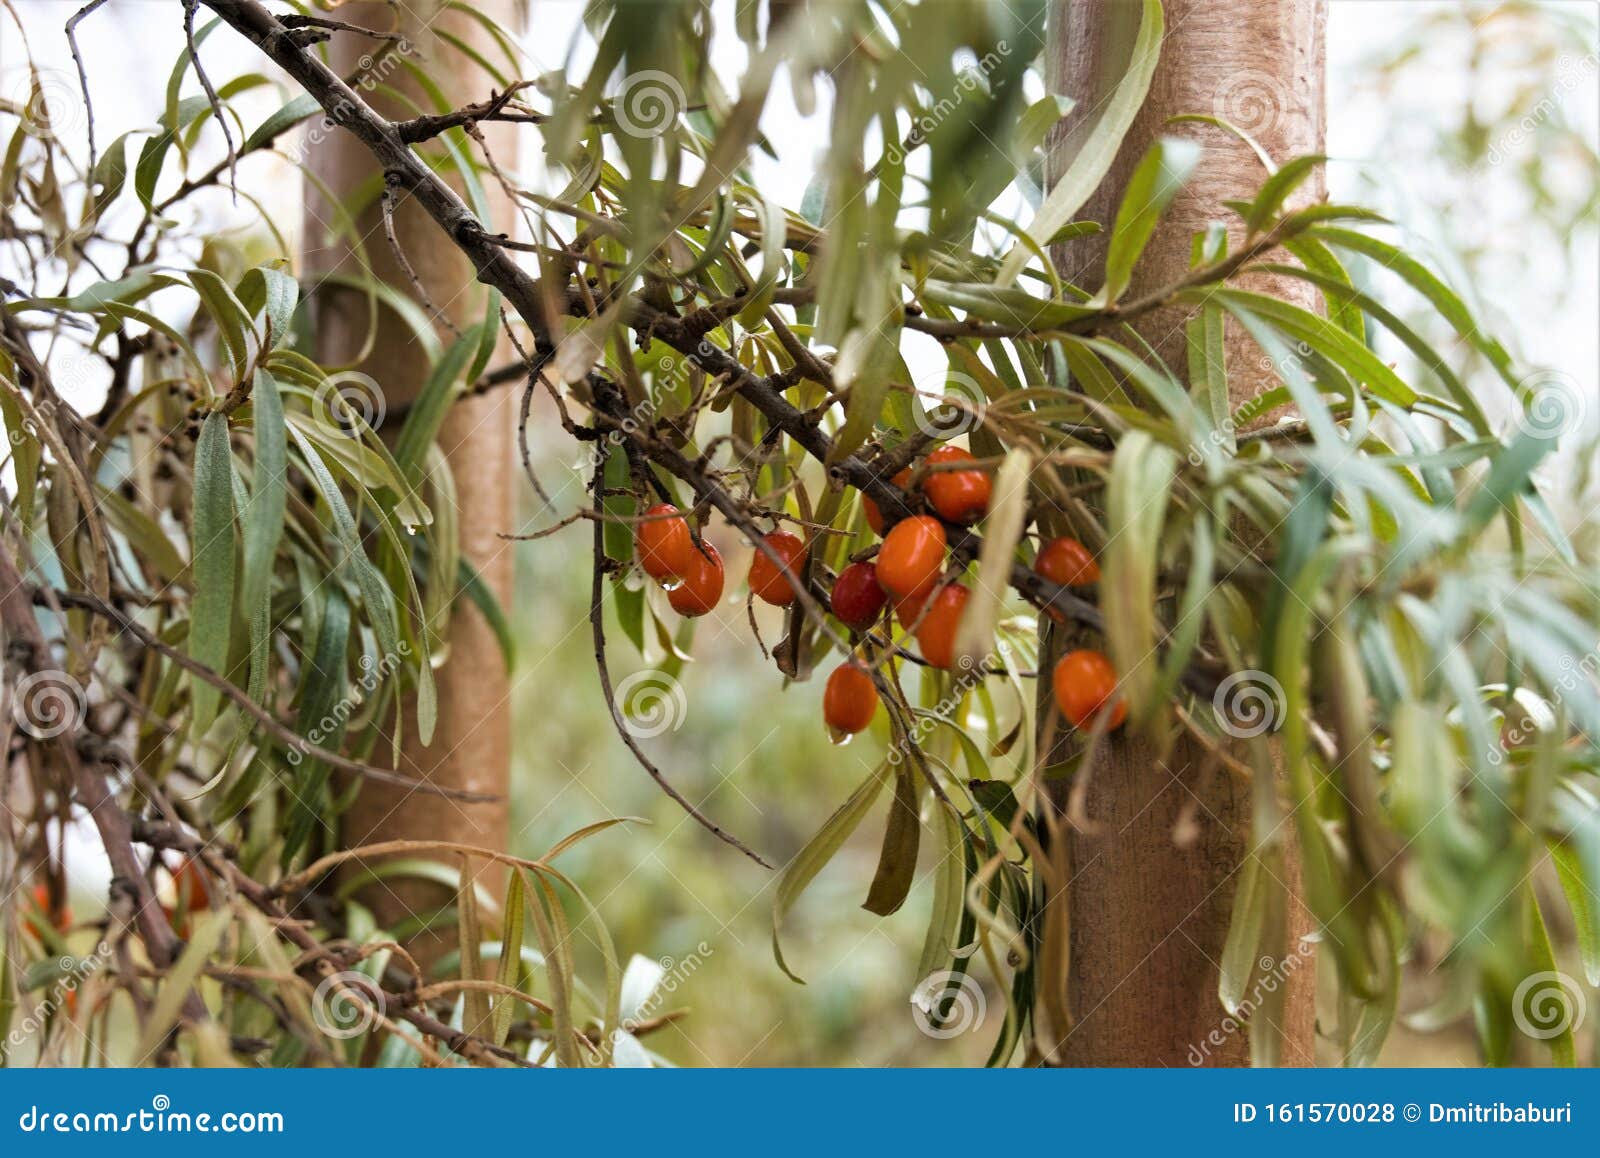 Sea Buckthorn Branch With Ripe Berries In Late Autumn Stock Photo